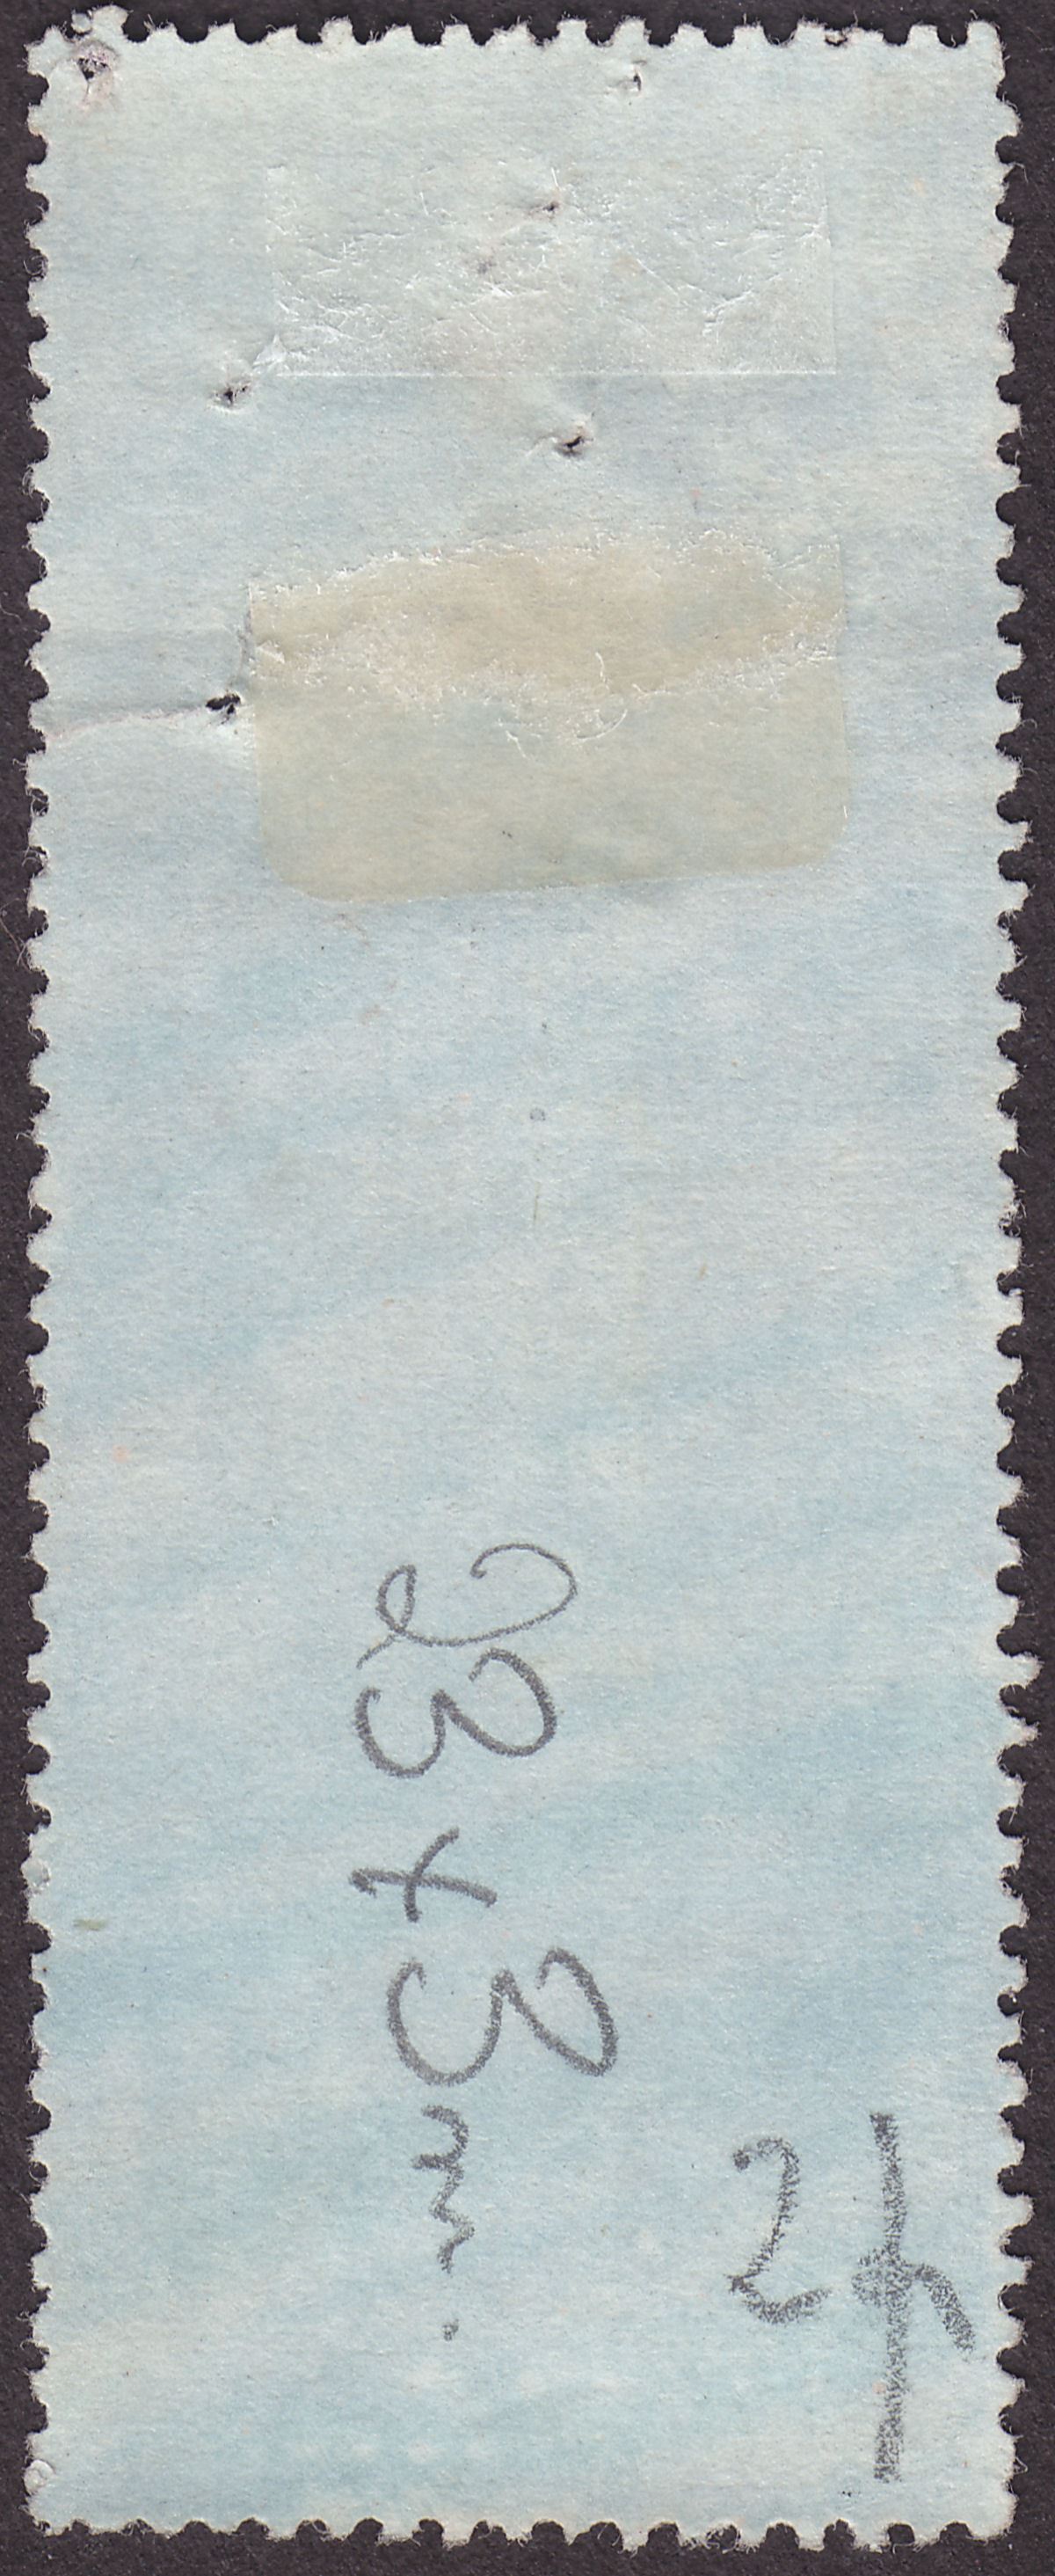 India 1879 QV Revenue Notarial Opt 23mm Foreign Bill 1r Bluish Used BF10bB tear